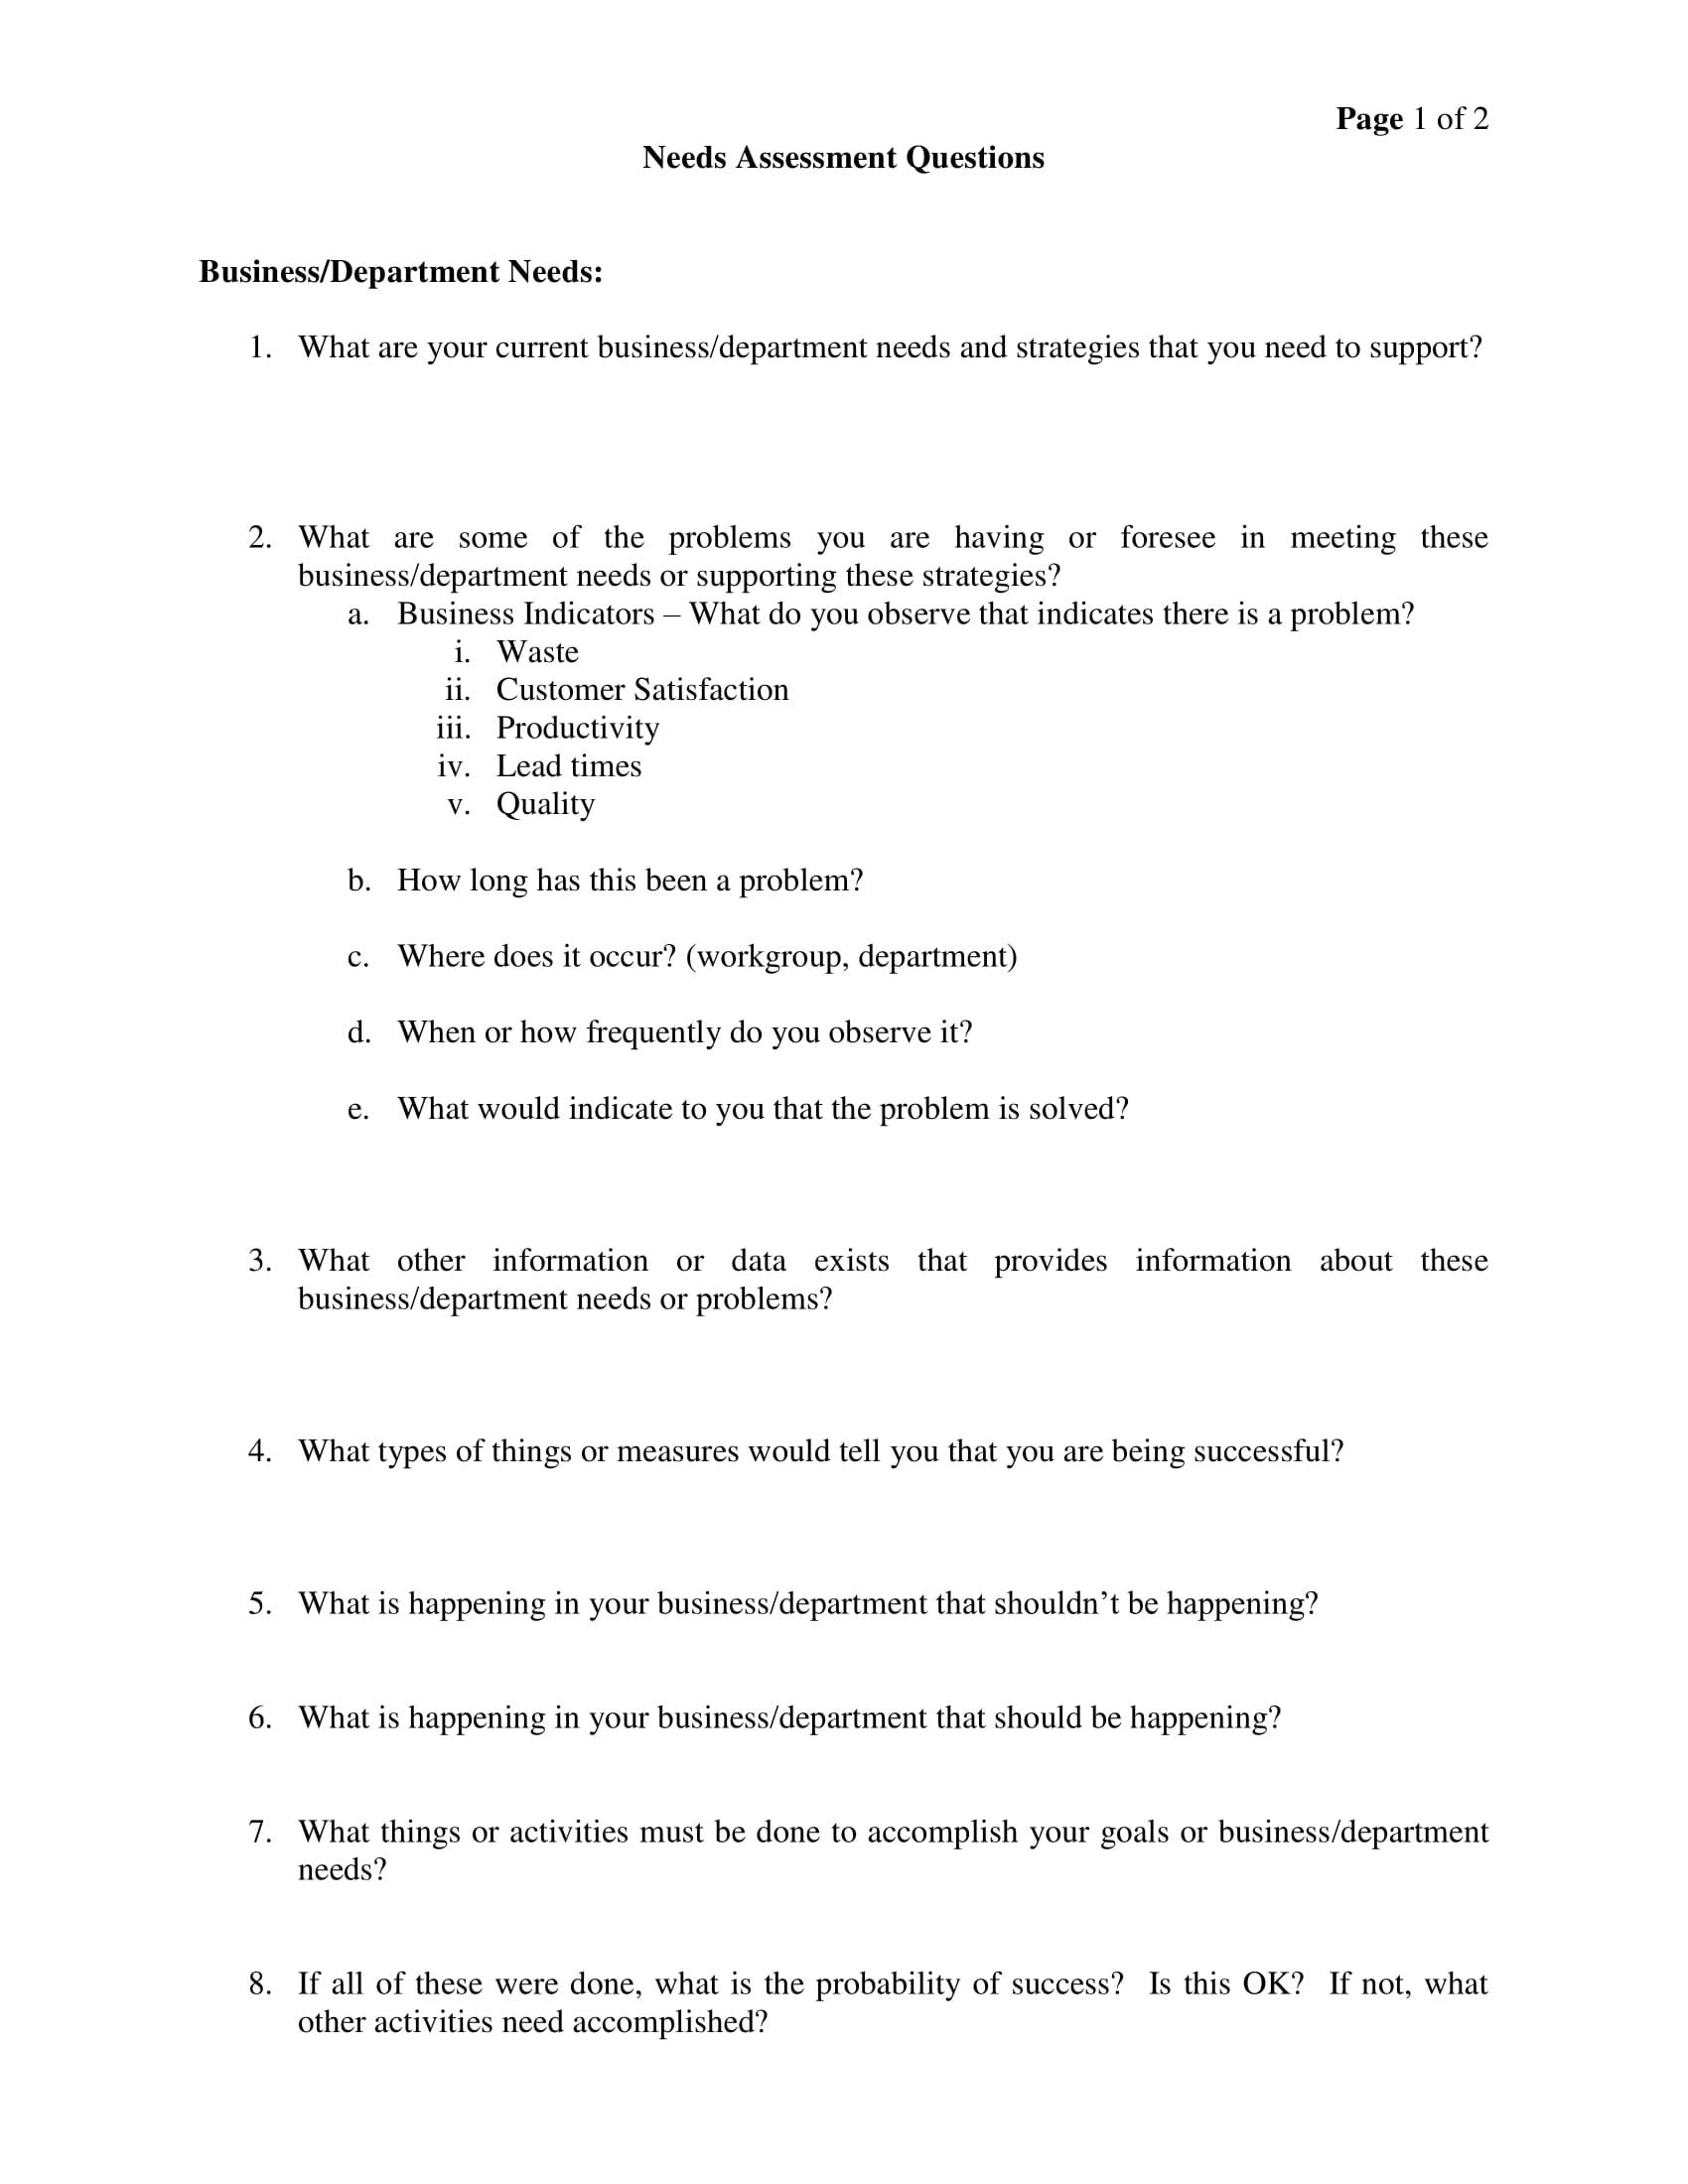 needs assessment questions example